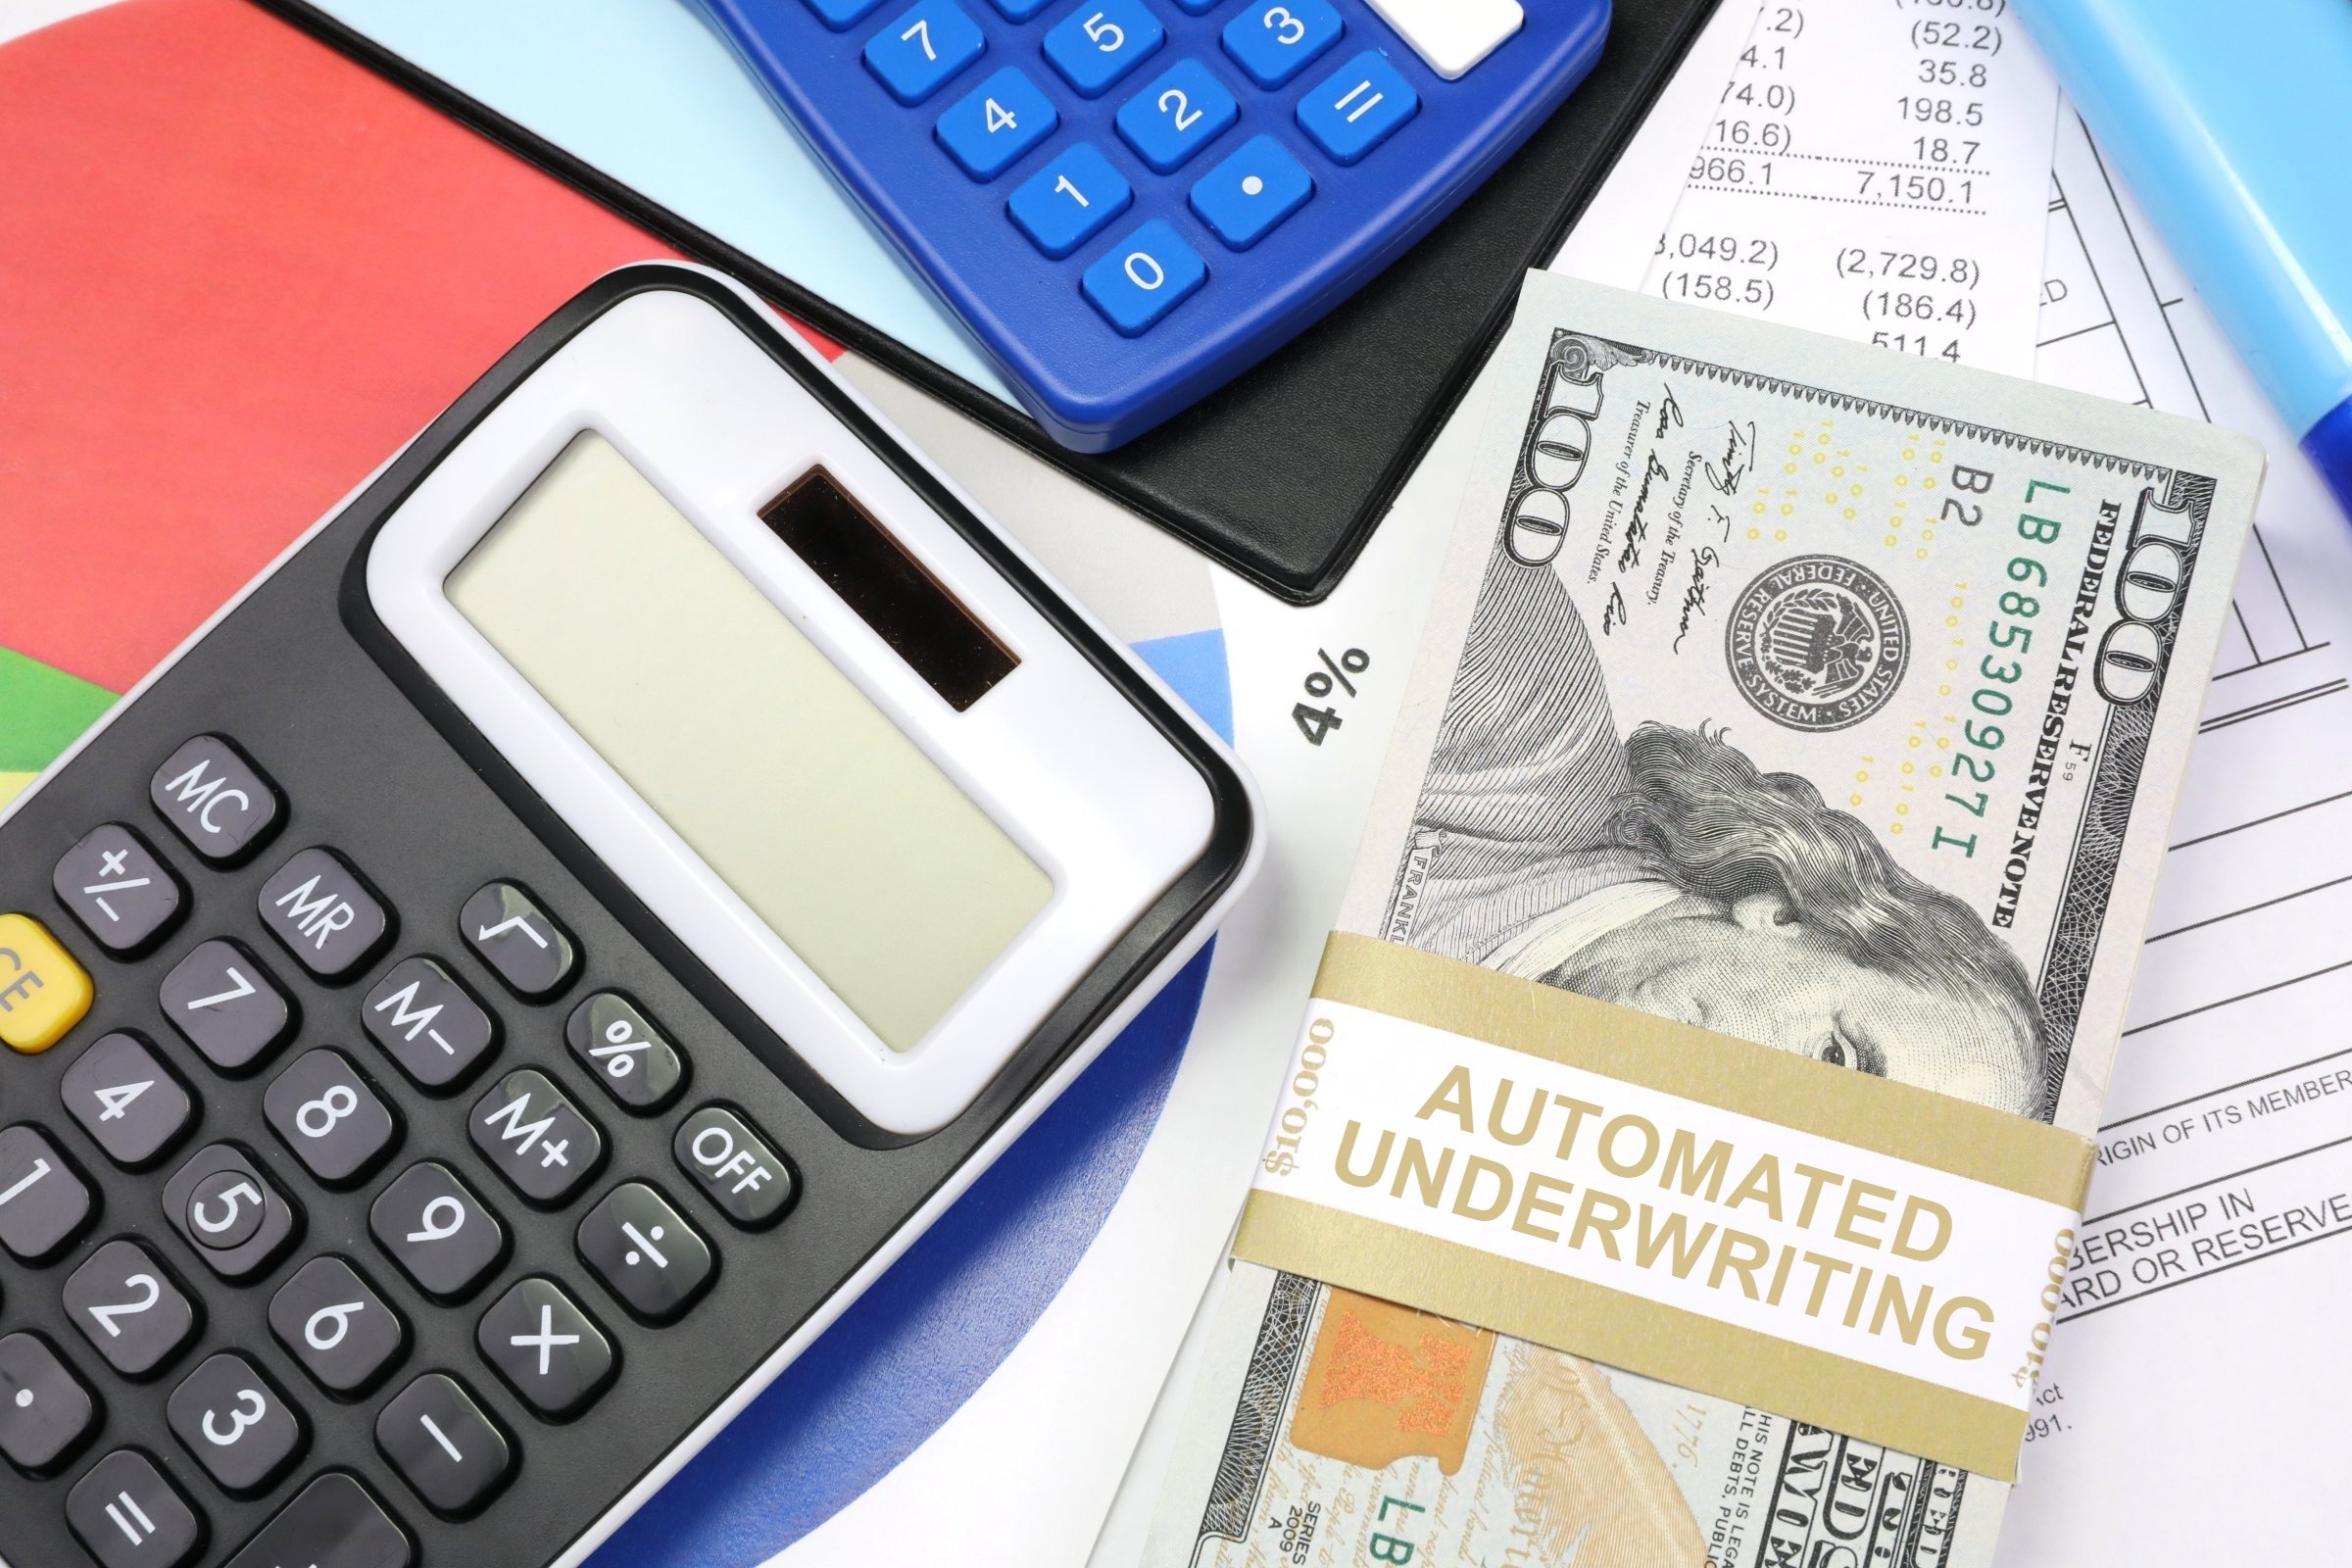 Automated Underwriting